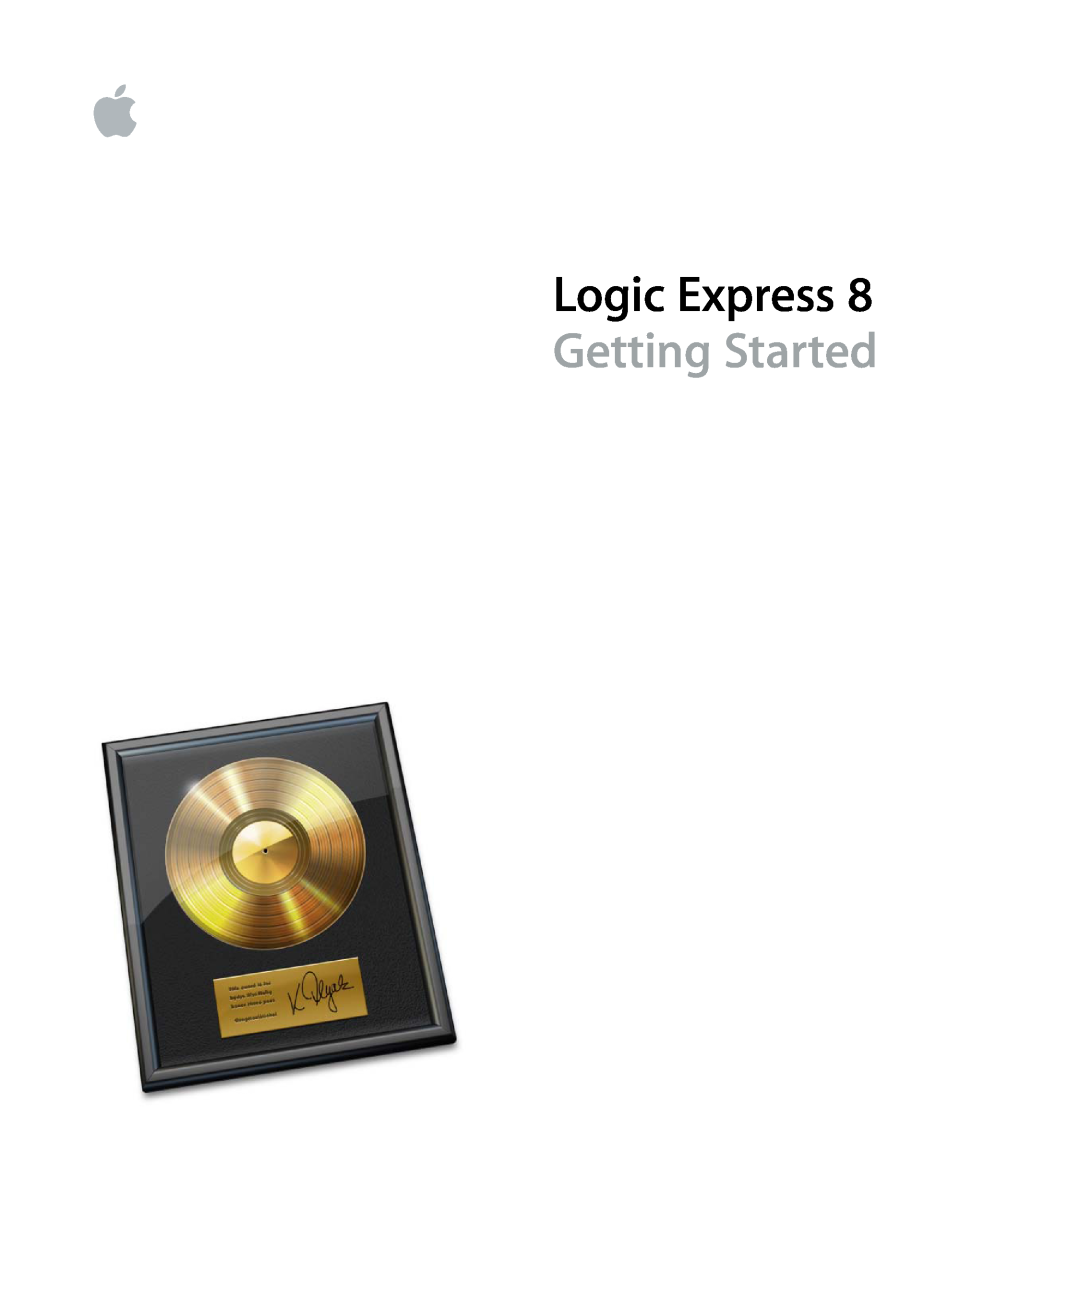 Apple 8 manual Logic Express, Getting Started 